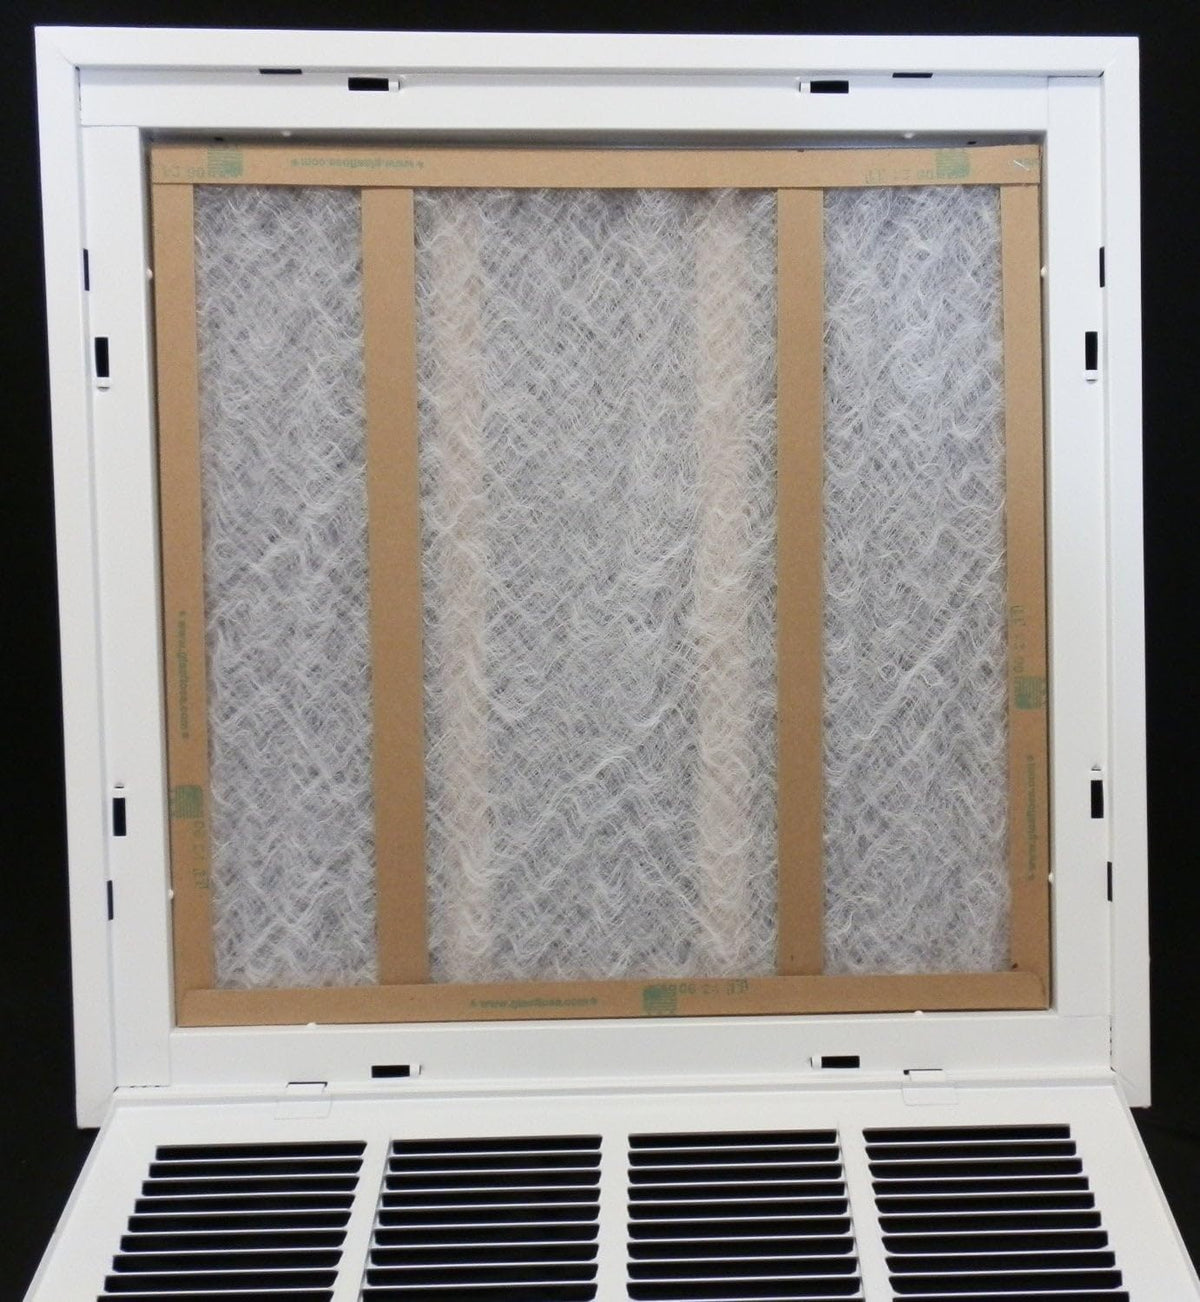 18&quot; X 18&quot; Steel Return Air Filter Grille for 1&quot; Filter - Removable Frame - [Outer Dimensions: 20 5/8&quot; X 20 5/8&quot;]